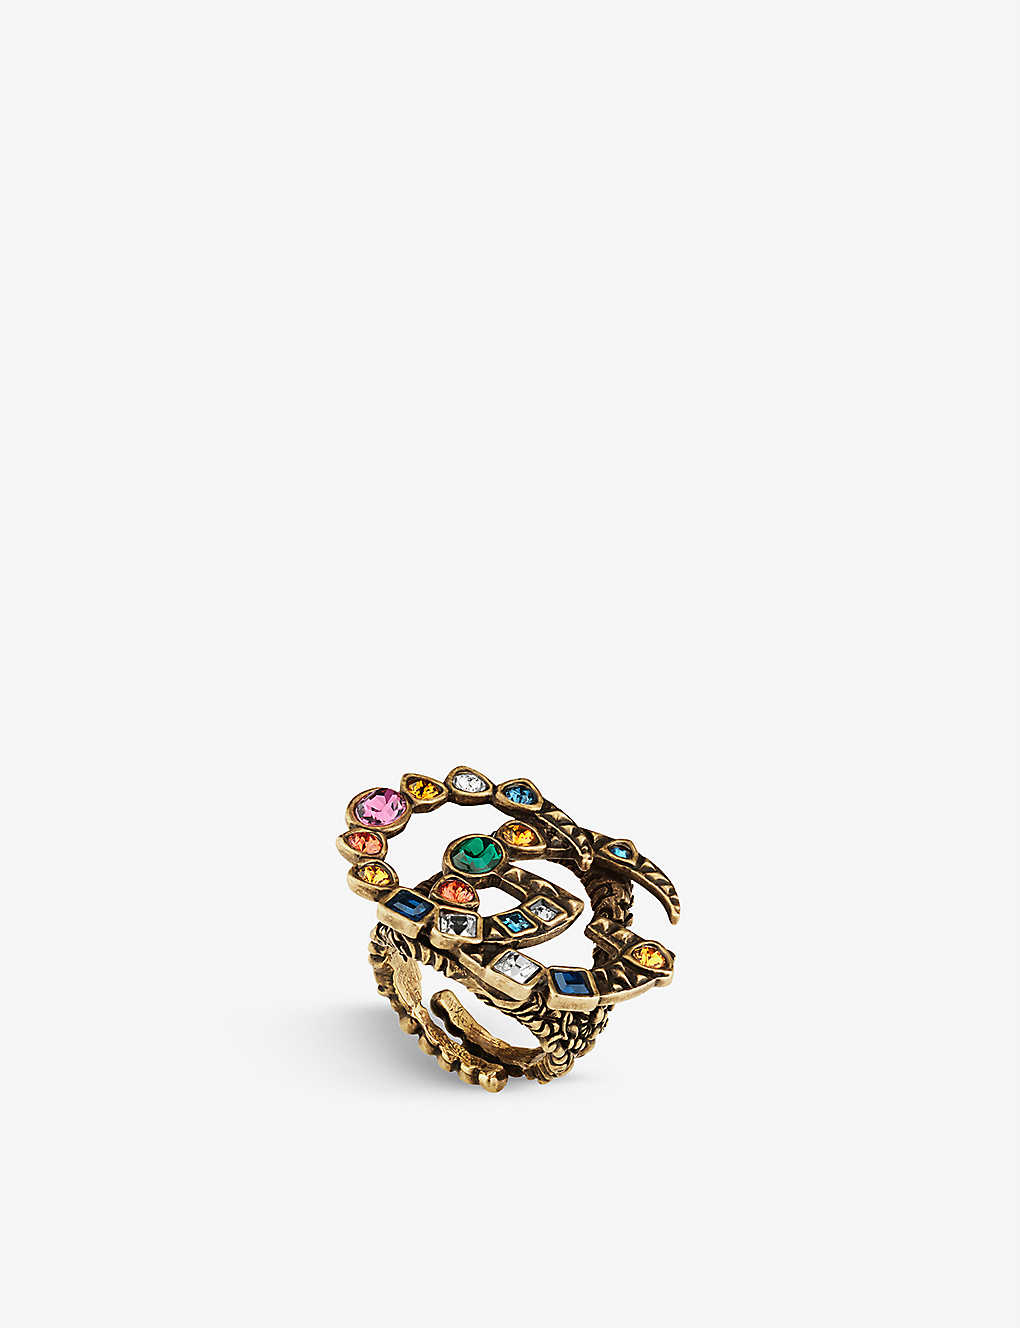 GG yellow gold-toned brass and Swarovski glass ring(9320142)